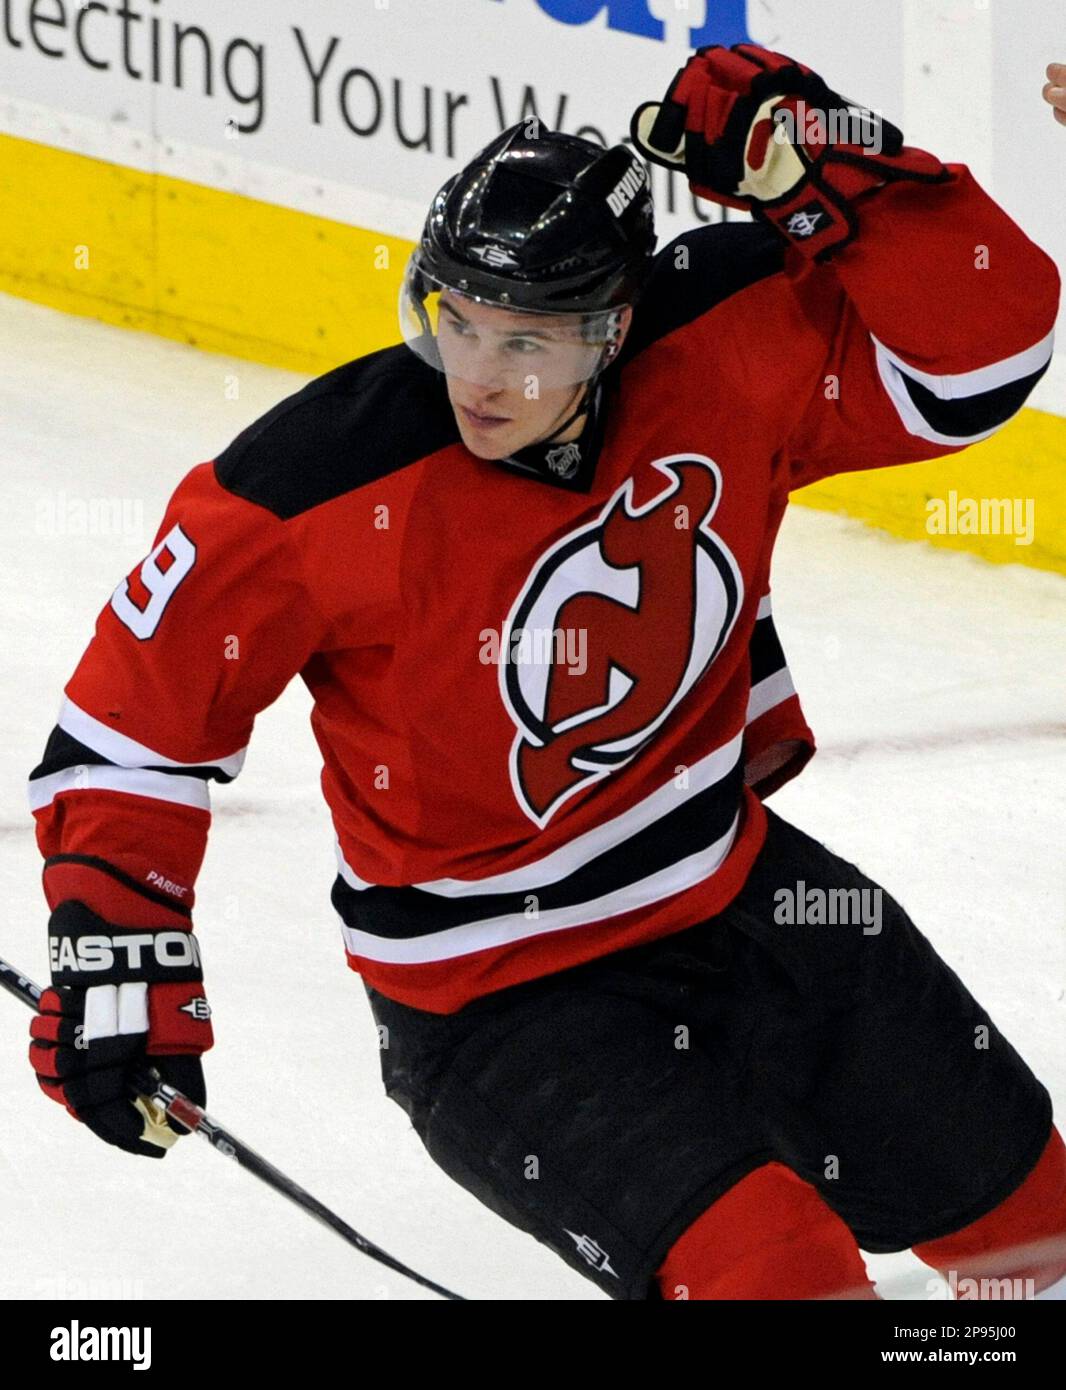 NHL: What Will the New Jersey Devils Do About Zach Parise?